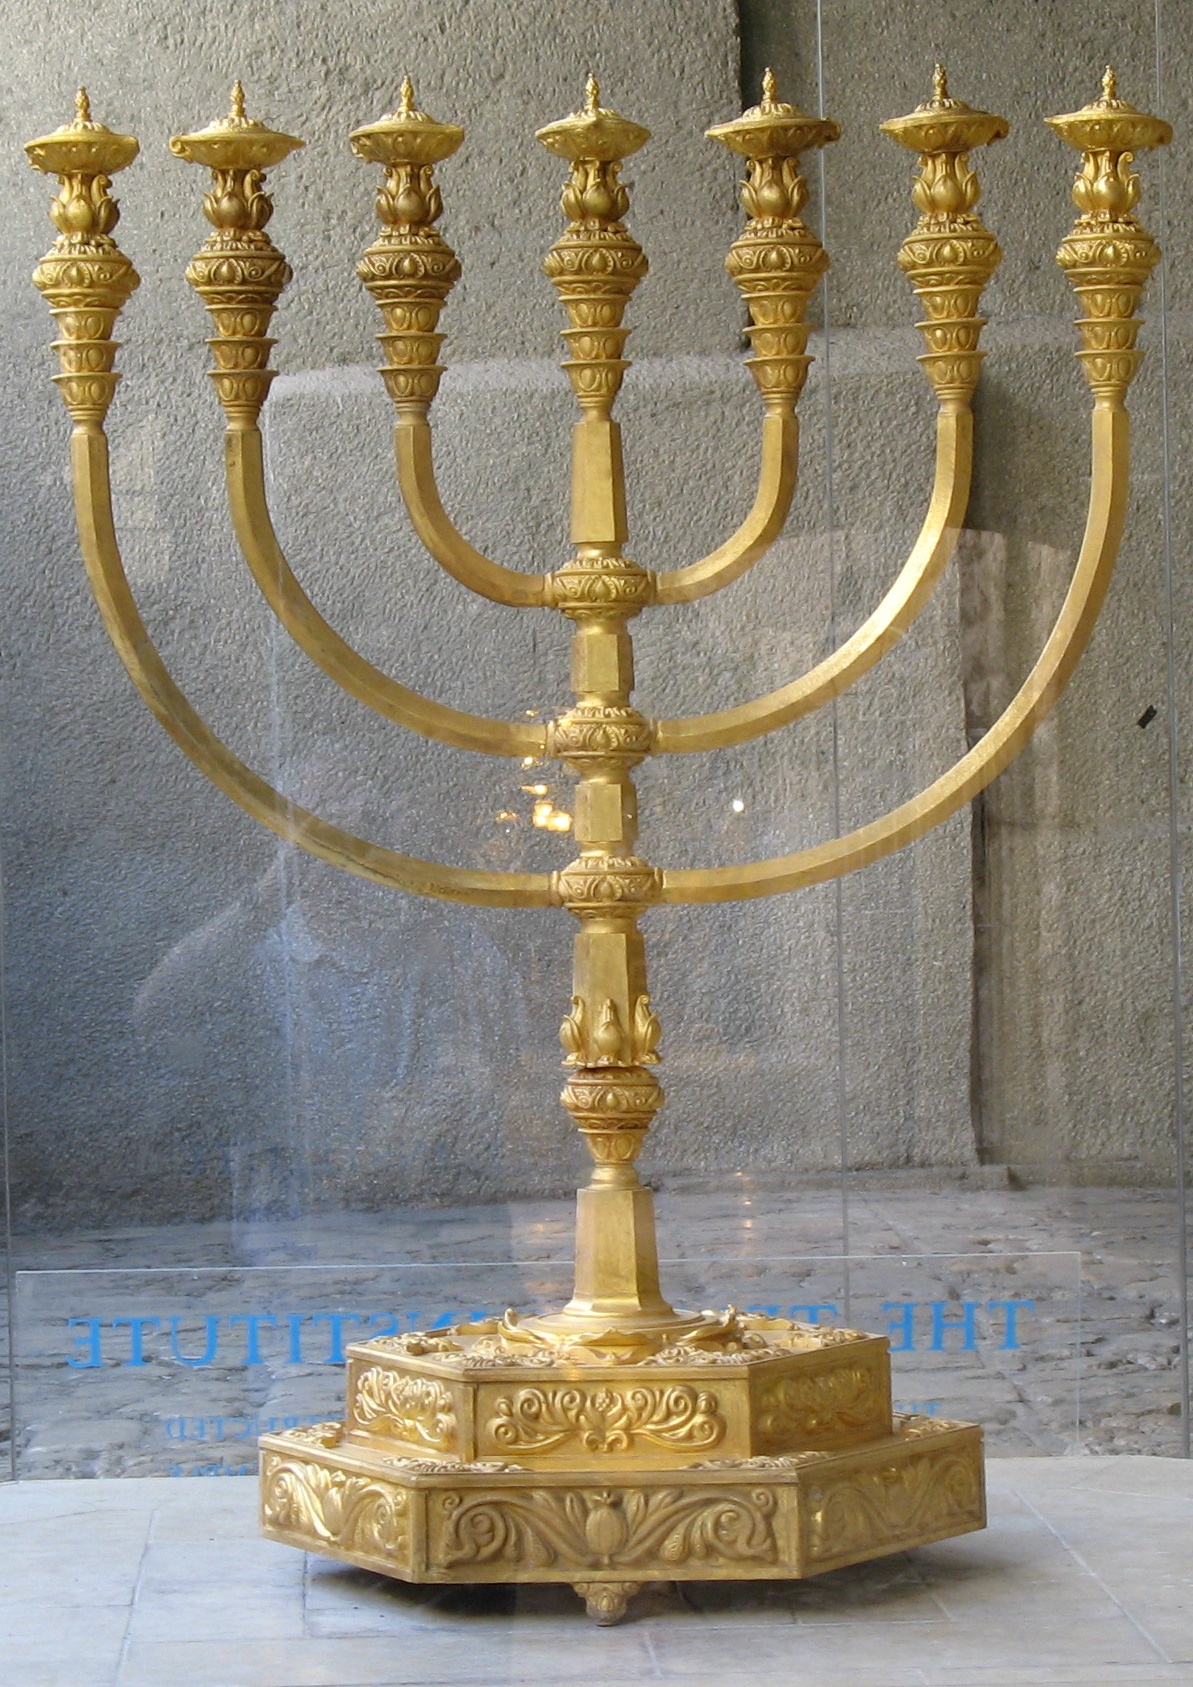 A reconstruction of the Menorah of the Temple created by the Temple Institute